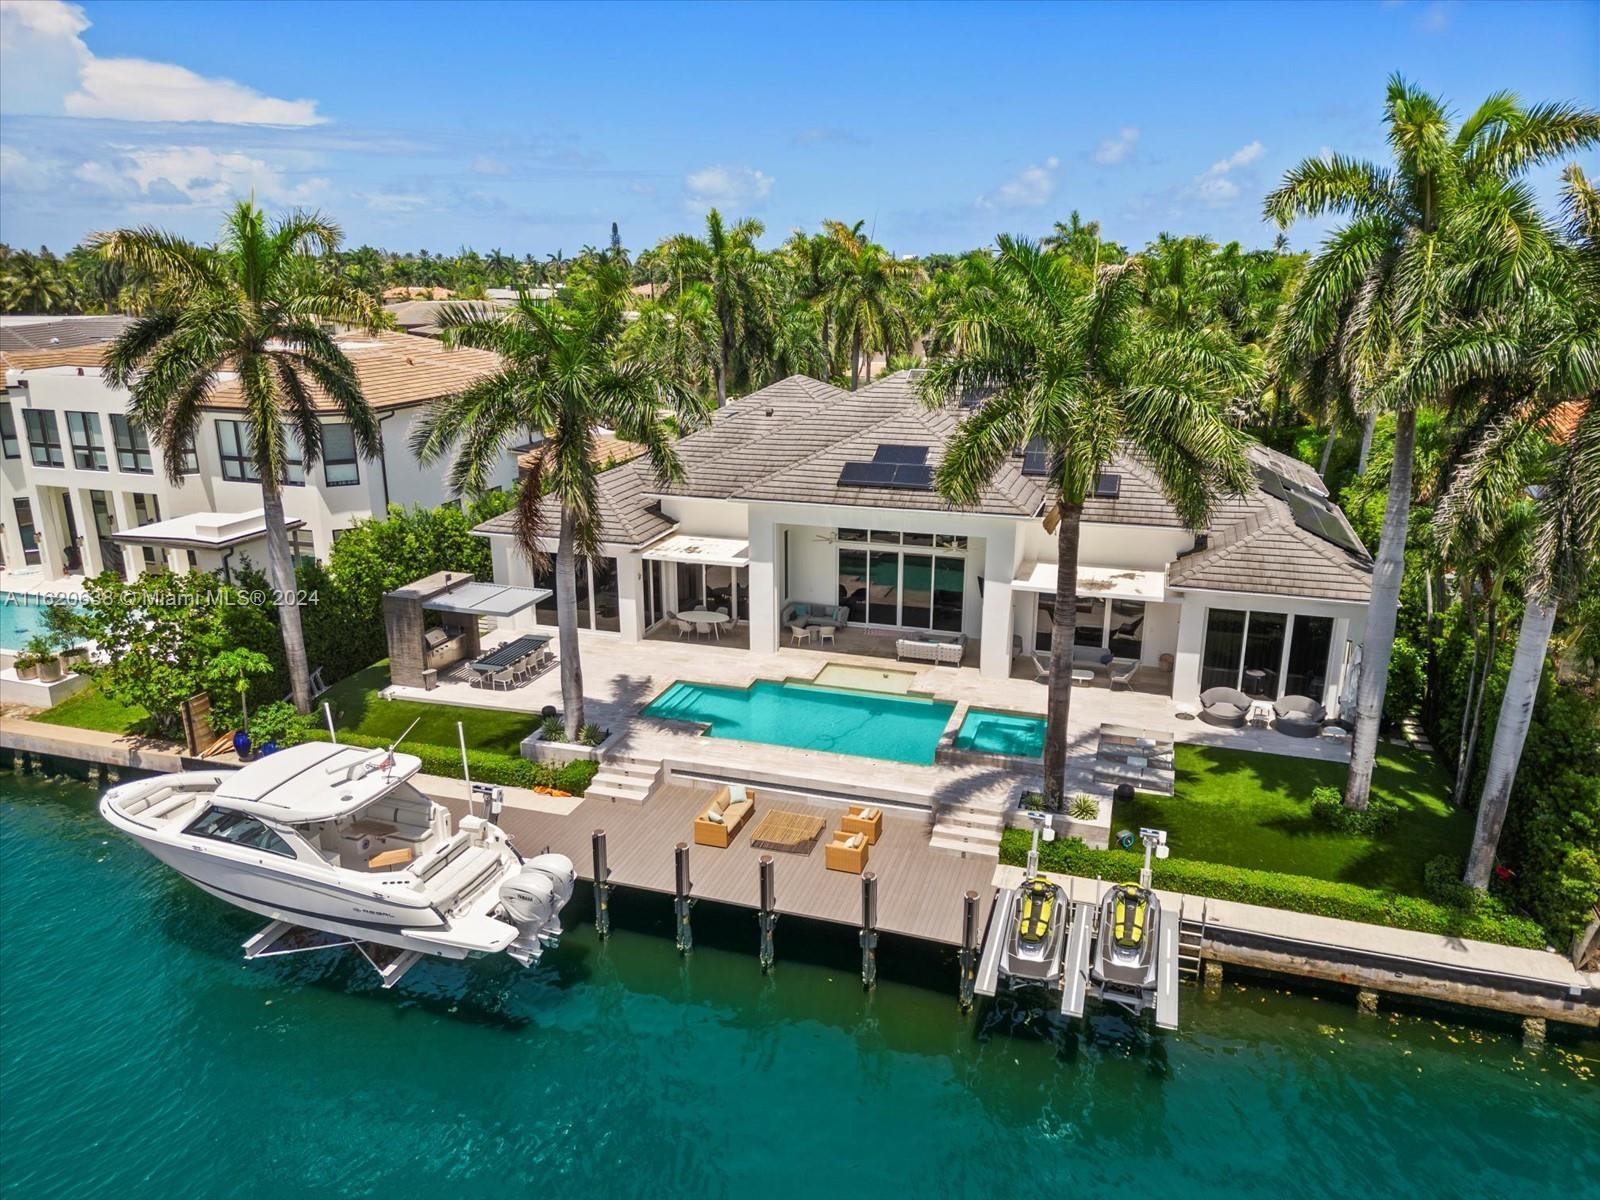 Welcome to your dream home in Golden Beach's exclusive South Island! This unique turnkey one-story residence, set on an oversized 18,975 sqft lot, features a spacious open floor plan with soaring 16 ft ceilings. Revel in stunning waterfront living with 115 ft on the water, complete with a newly built boat lift and a yacht and jet ski-equipped dock. The home boasts 6 luxurious suite bedrooms, including an oversized master suite with an outside Bali-style bathroom, a gym, and a second-floor in-law's or a teenager's dream unit . The manicured resort-like outdoor space is perfect for entertaining. Decorated to perfection and designed for the ultimate entertainer, this custom masterpiece offers unmatched amenities and is one of the most unique and desirable  properties in the neighborhood.